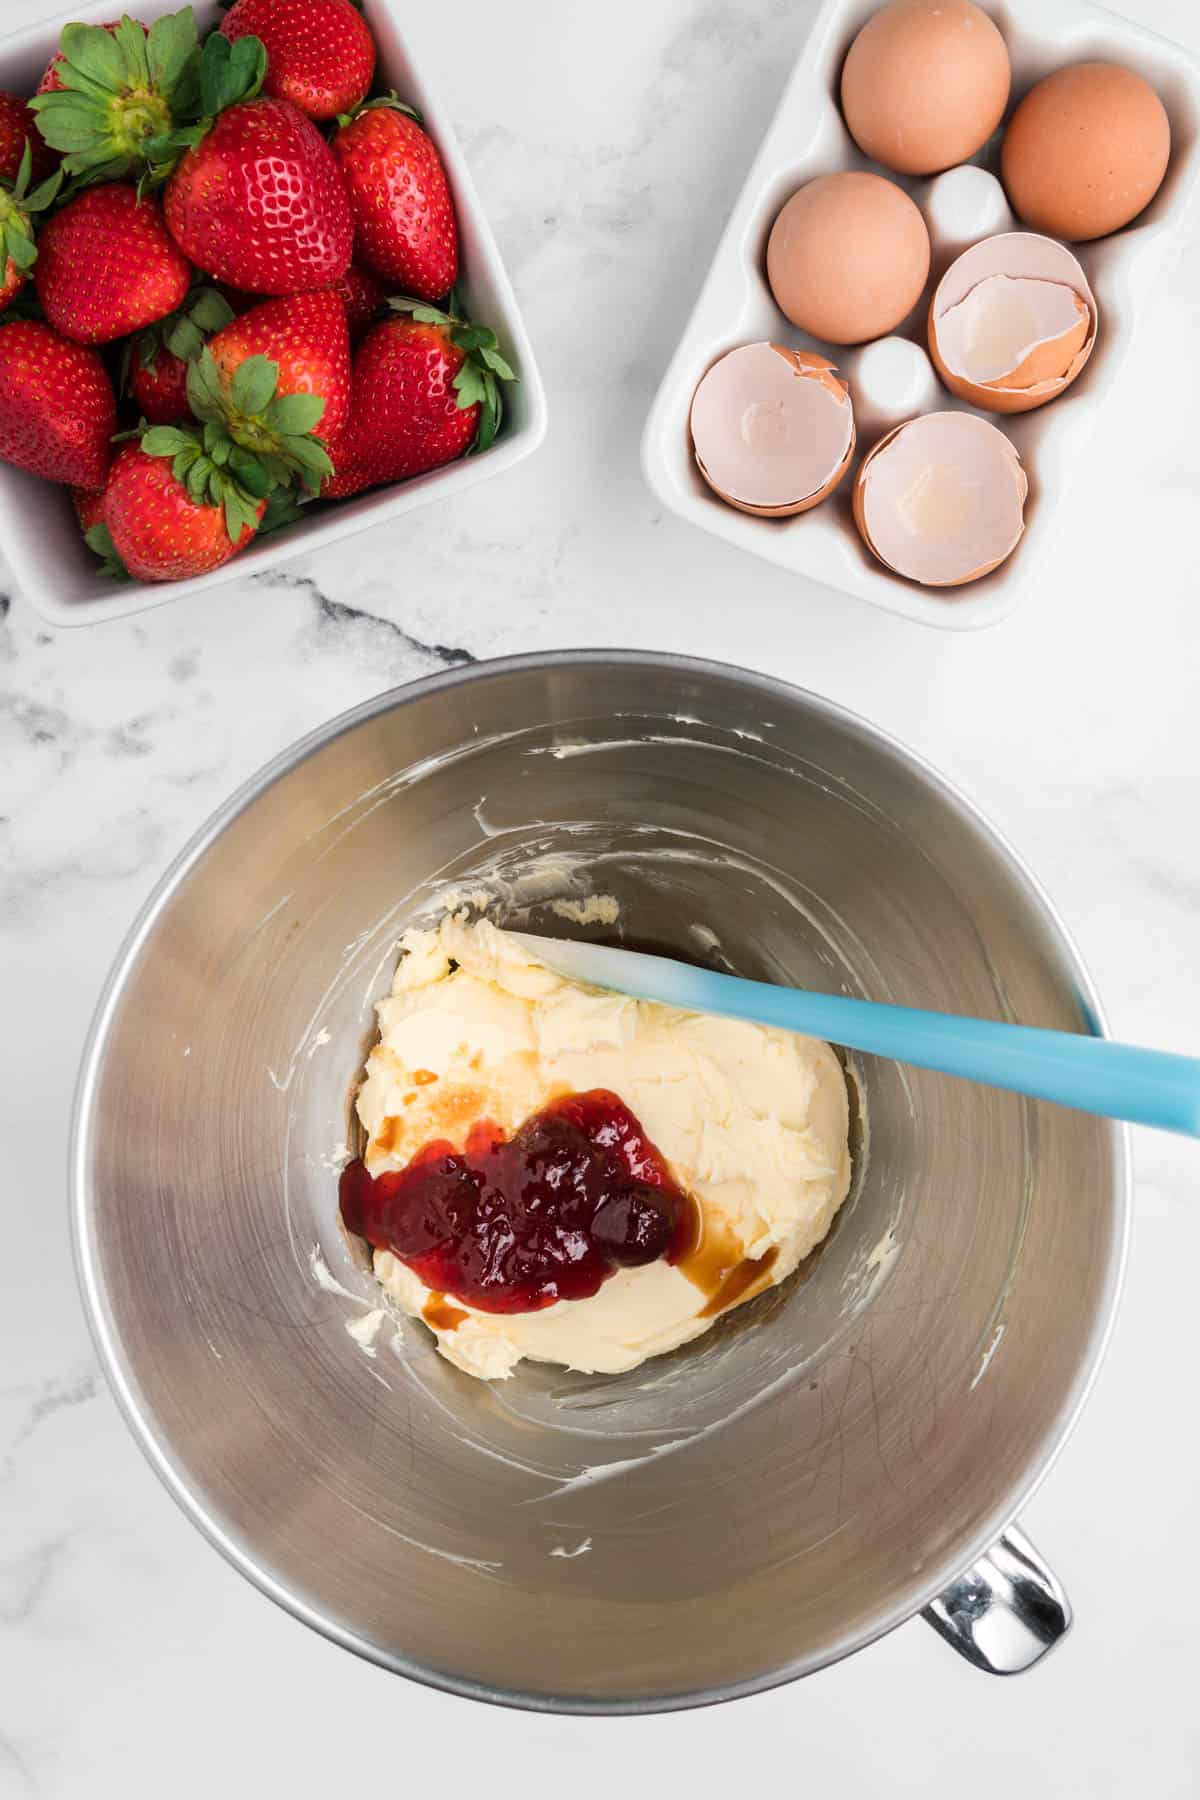 Cream cheese with strawberry preserver and vanilla in a stainless steel bowl.